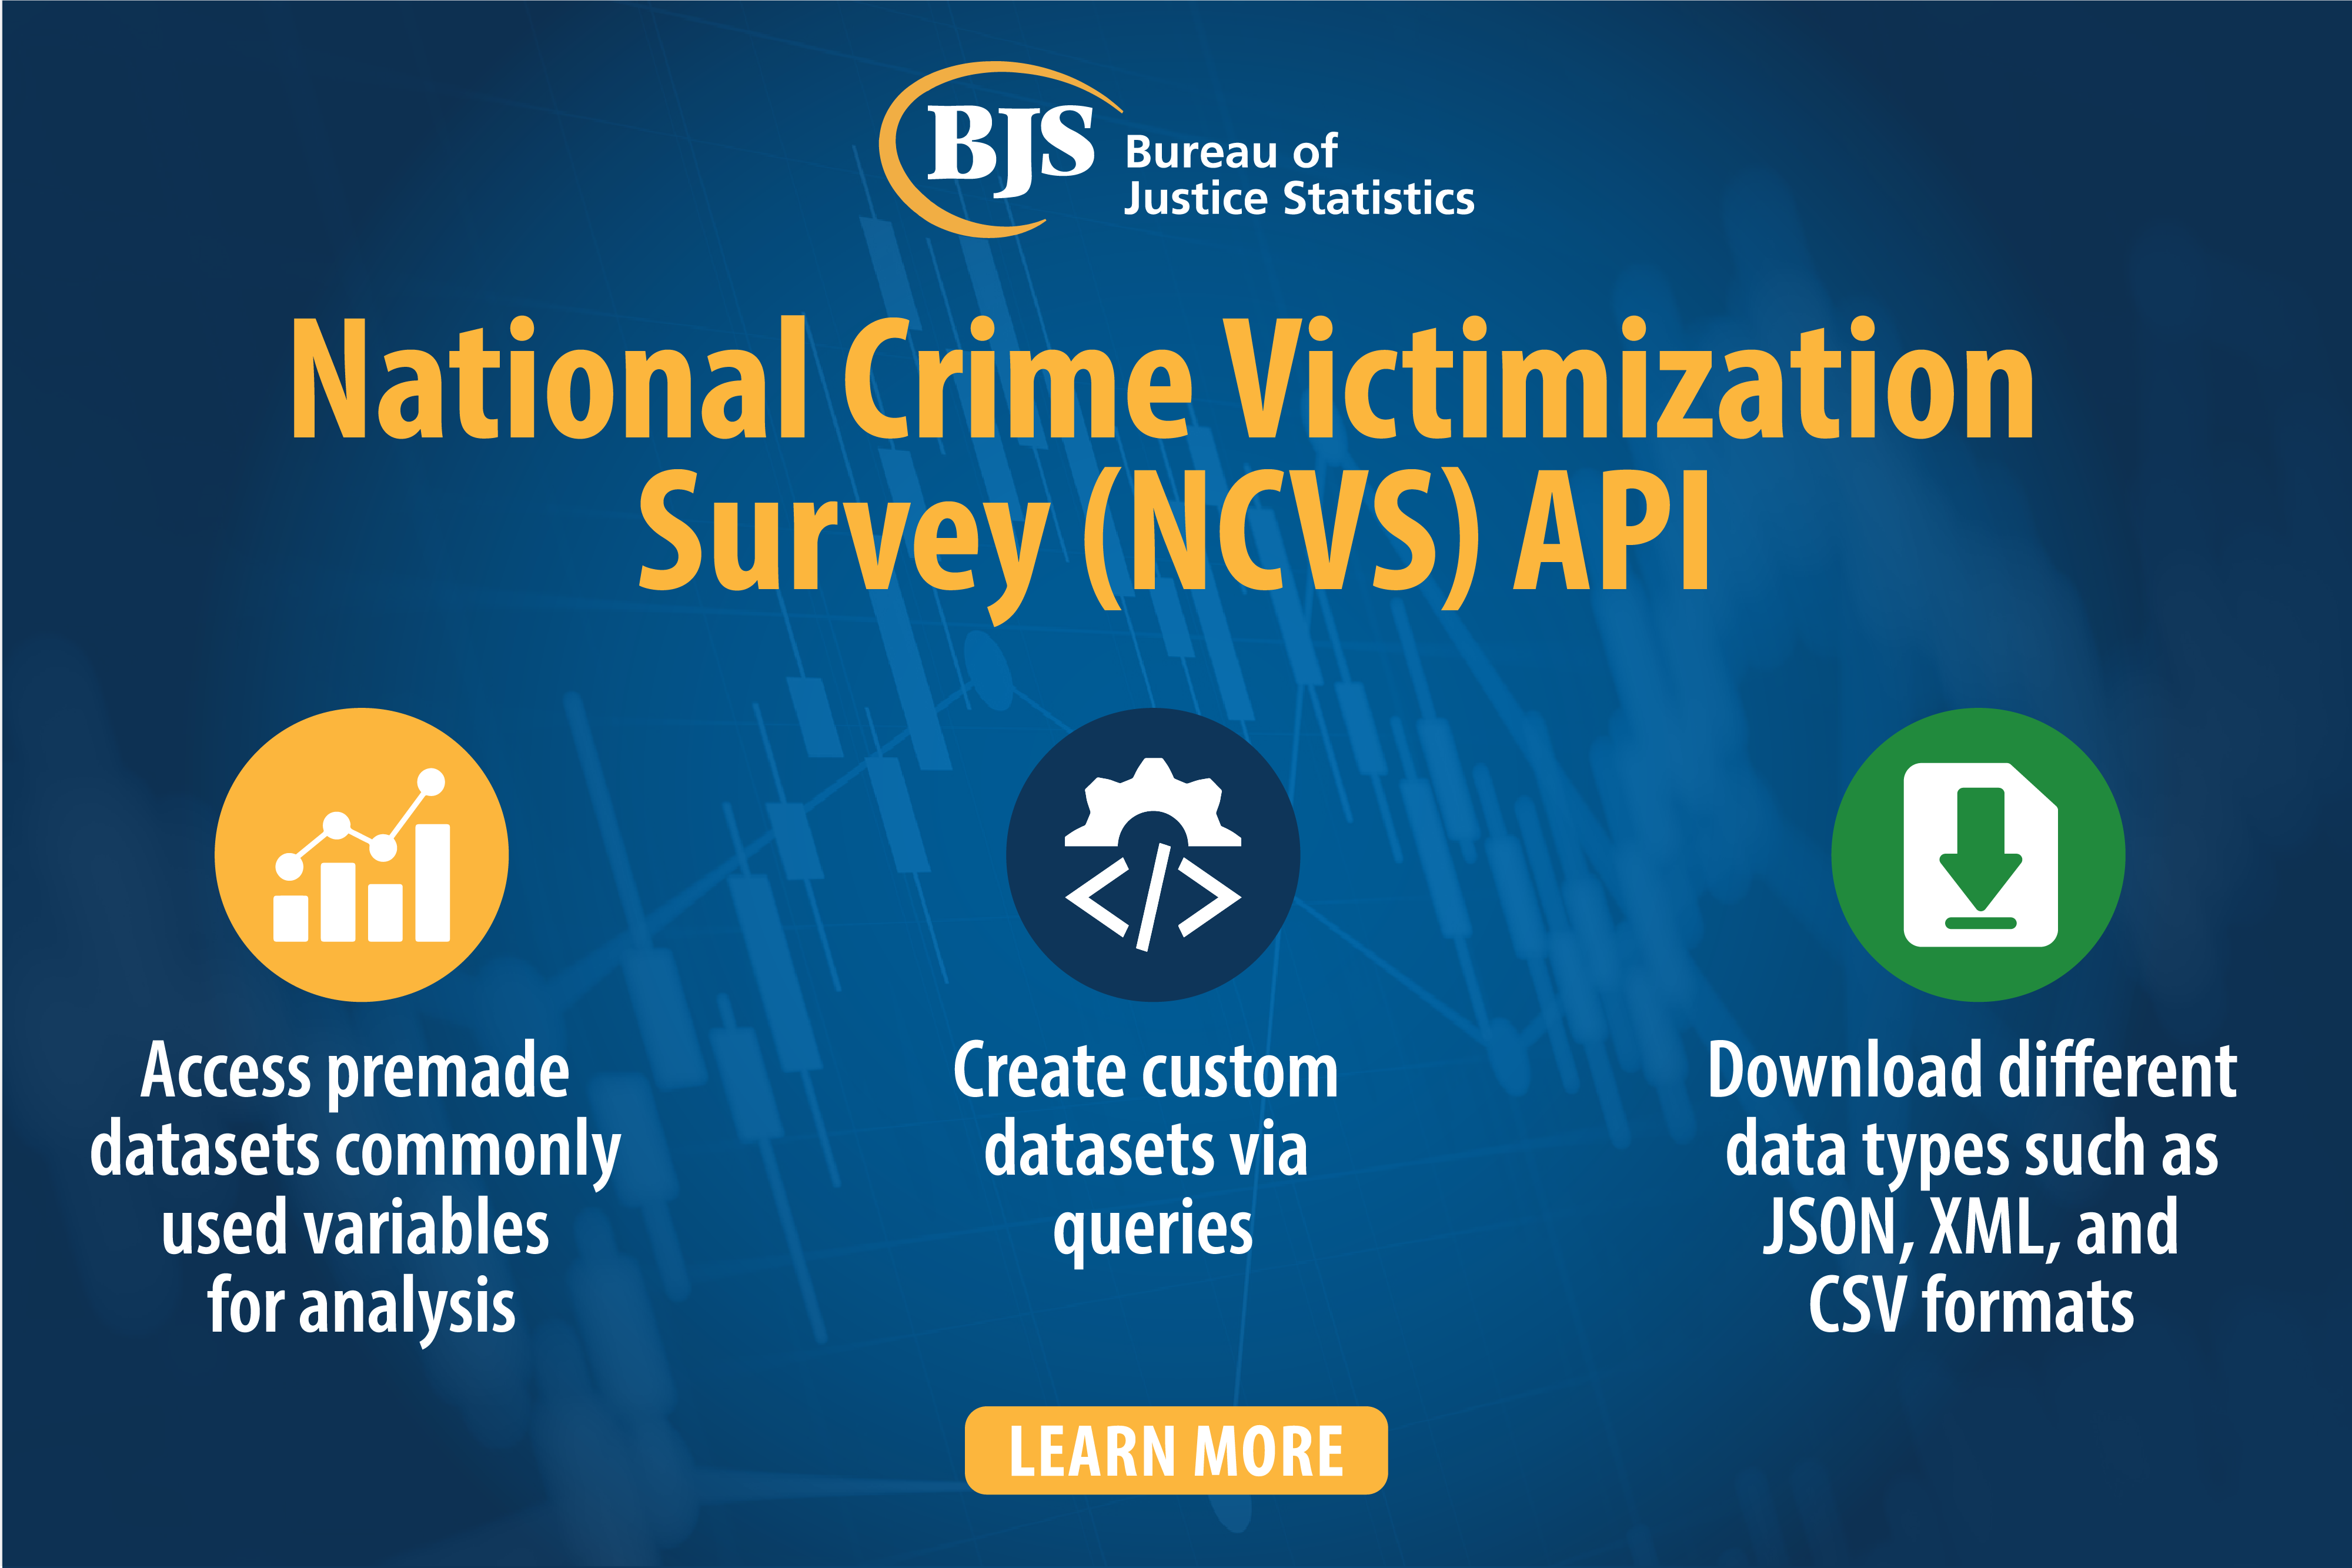 National Crime Victimization Survey (NCVS) API image.  Access premade datasets, create customs datasets, and download different data types.